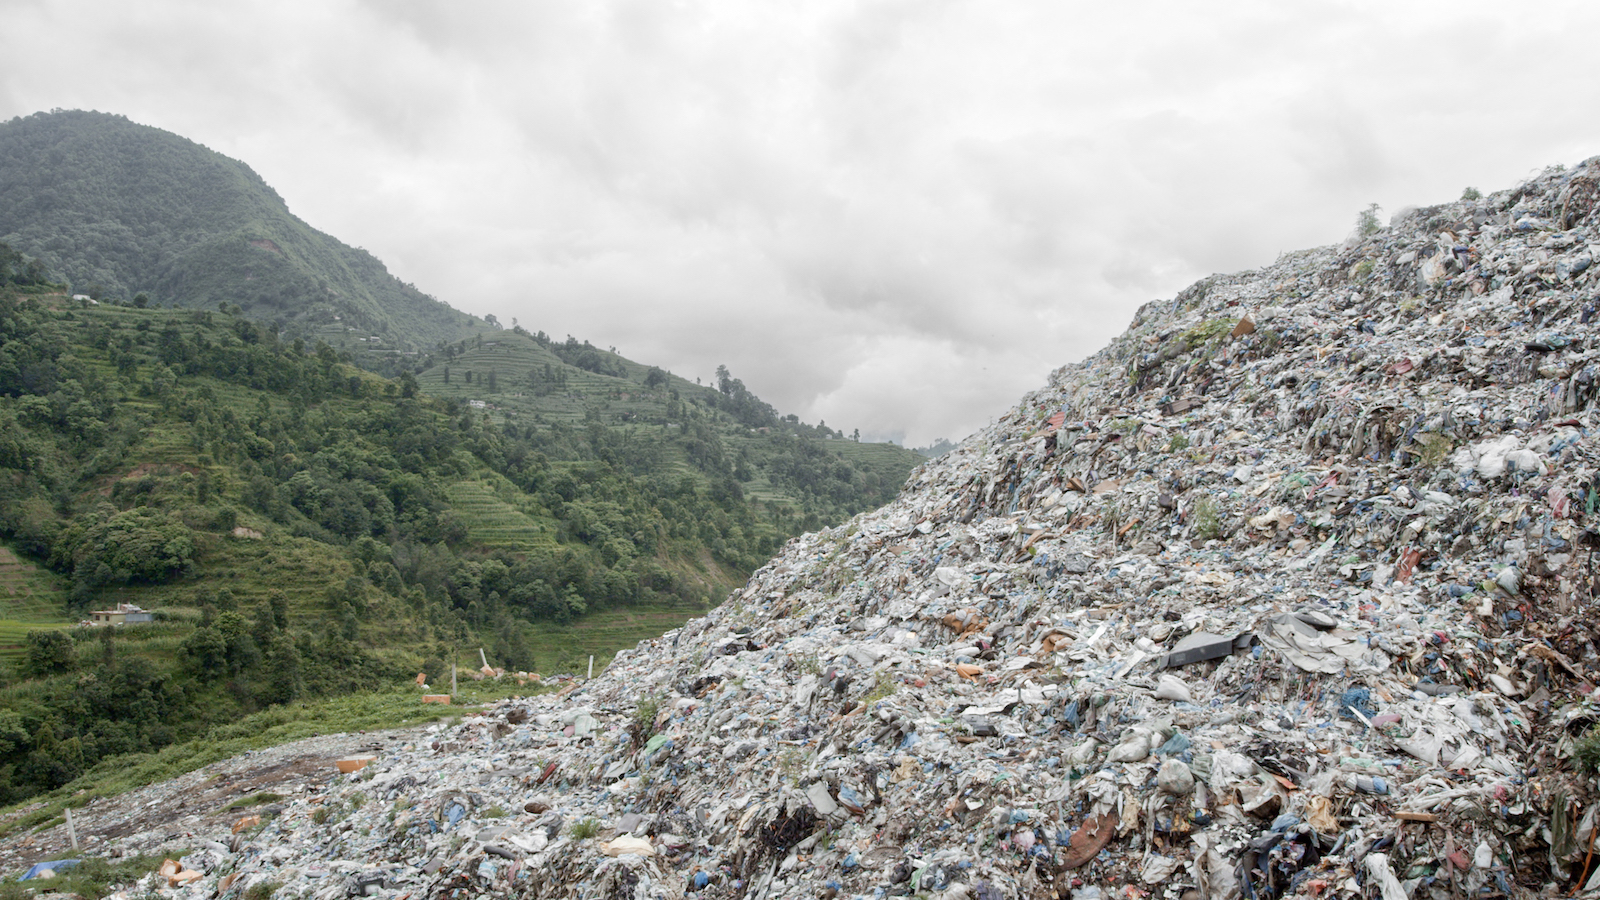 An image of a gigantic trash heap, as big as the green mountain next to it